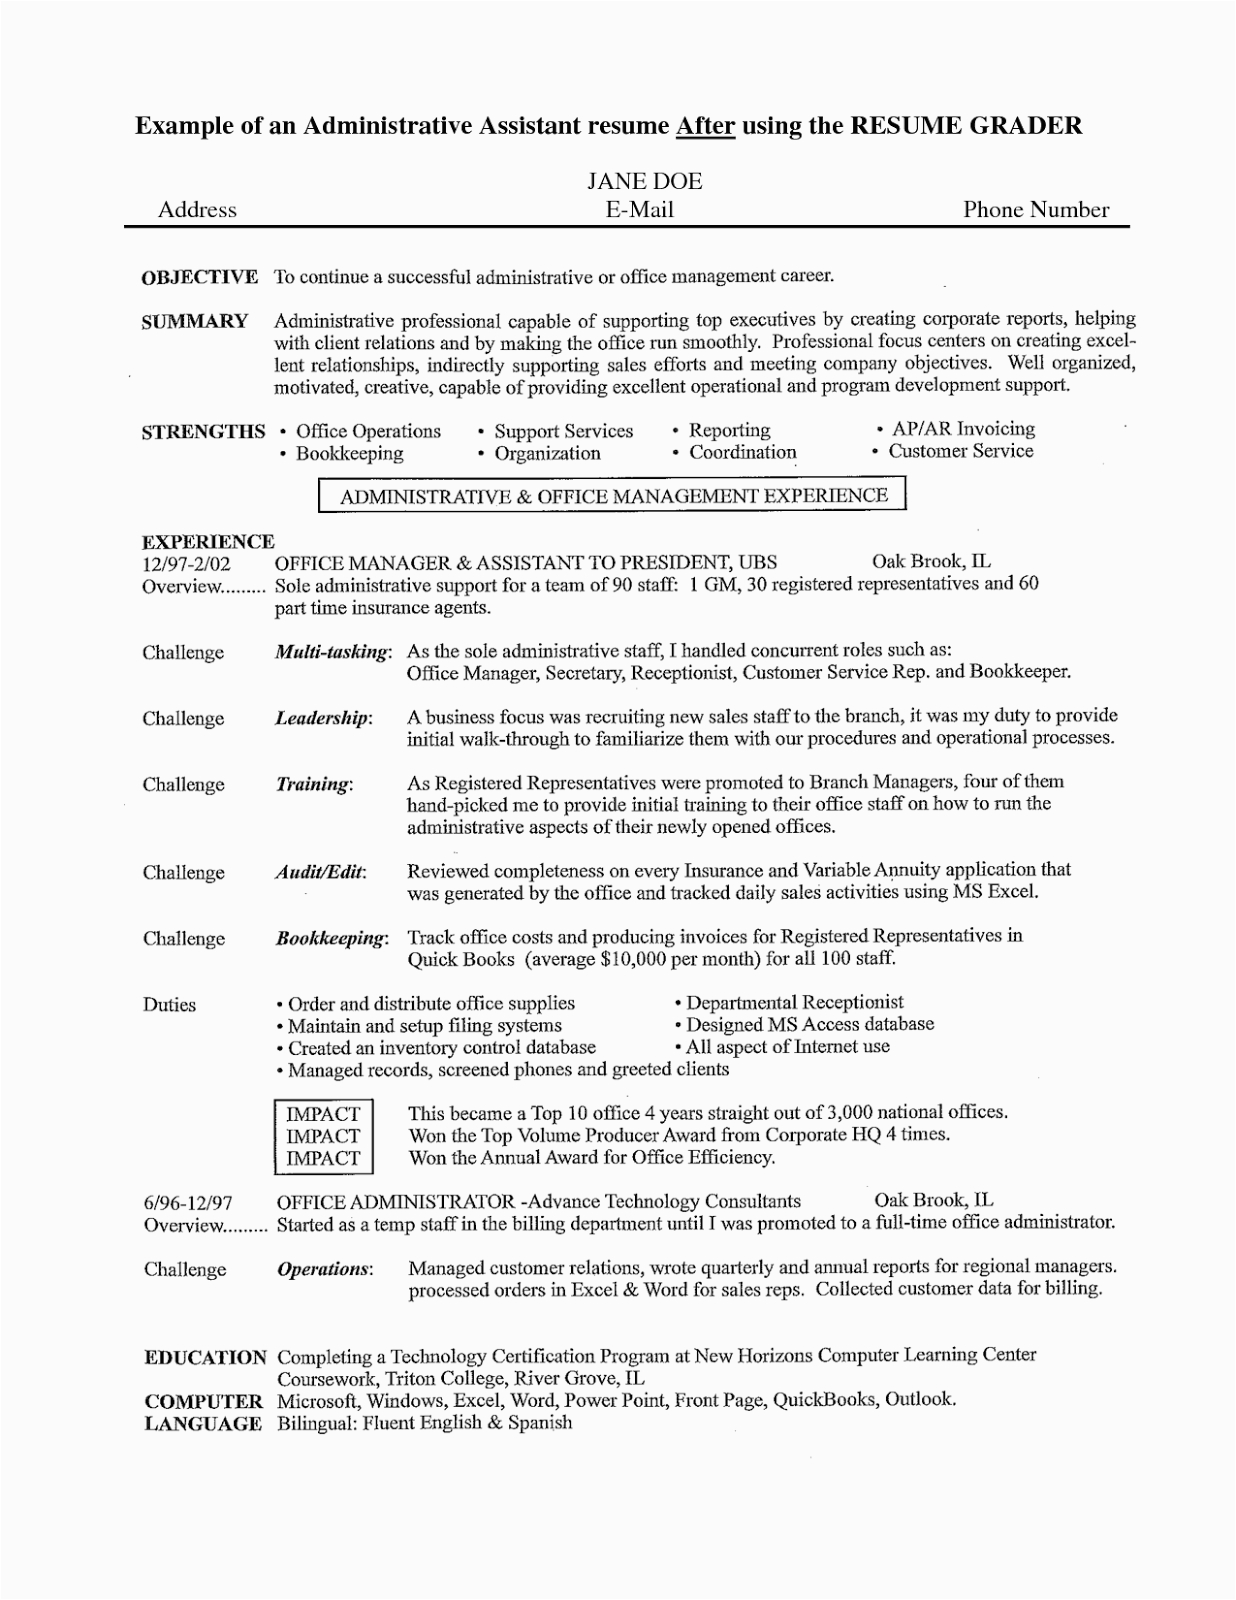 sample objective on resume for